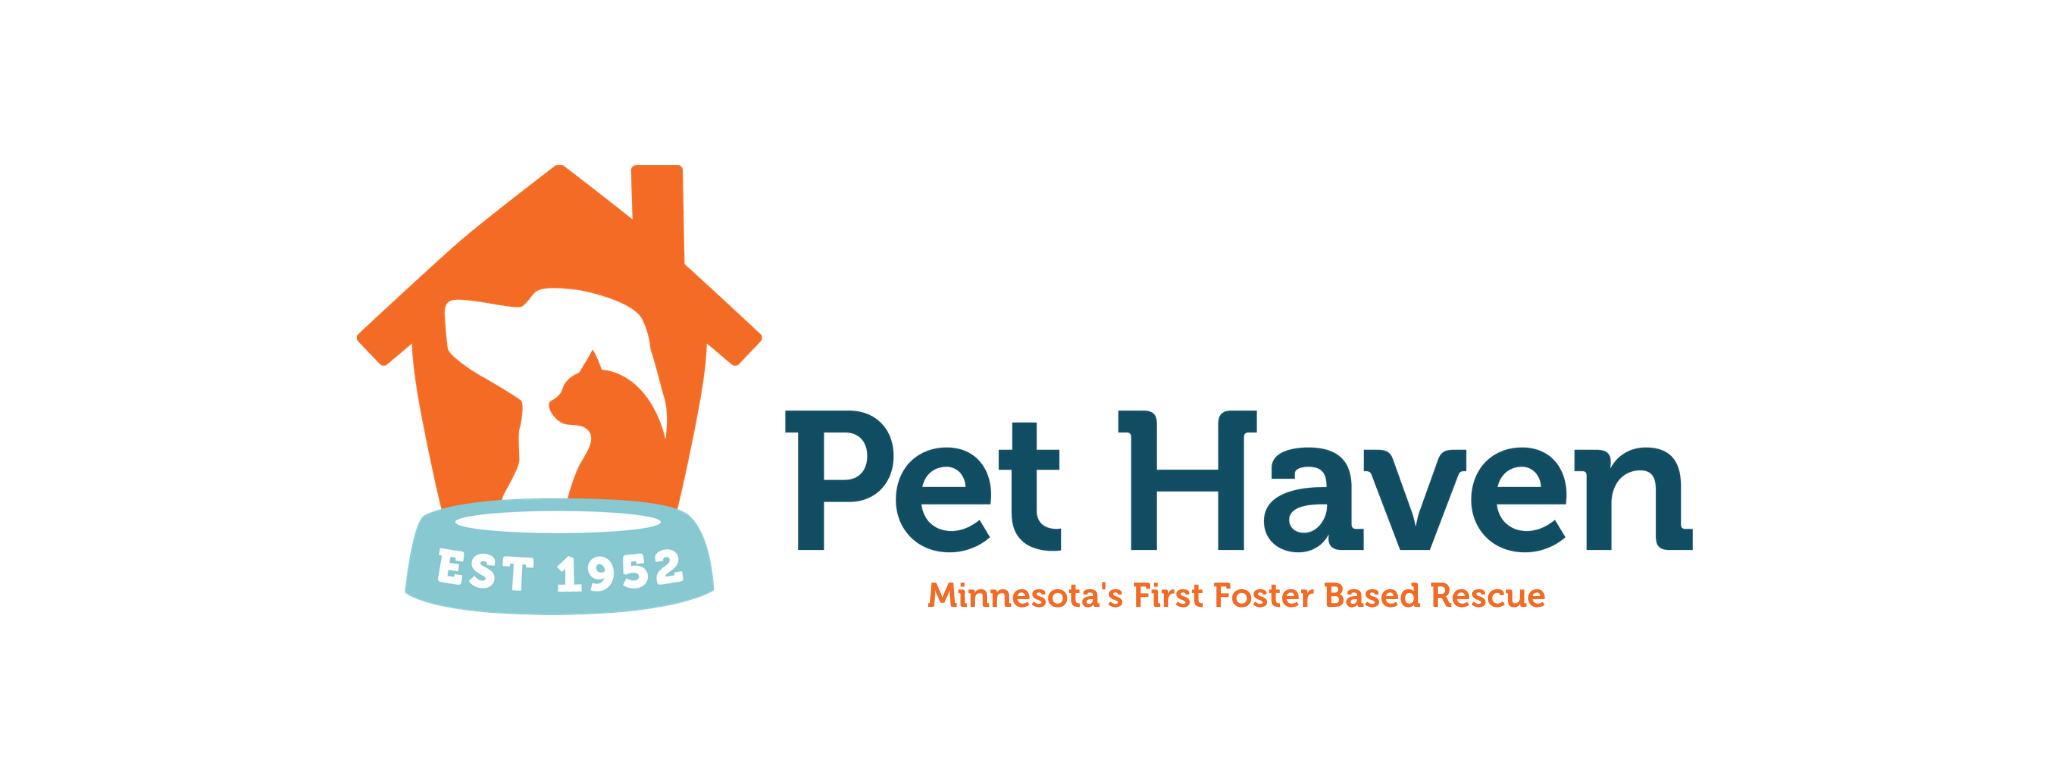 Pethaven logo featuring an orange house with the silhouettes of a dog and cat